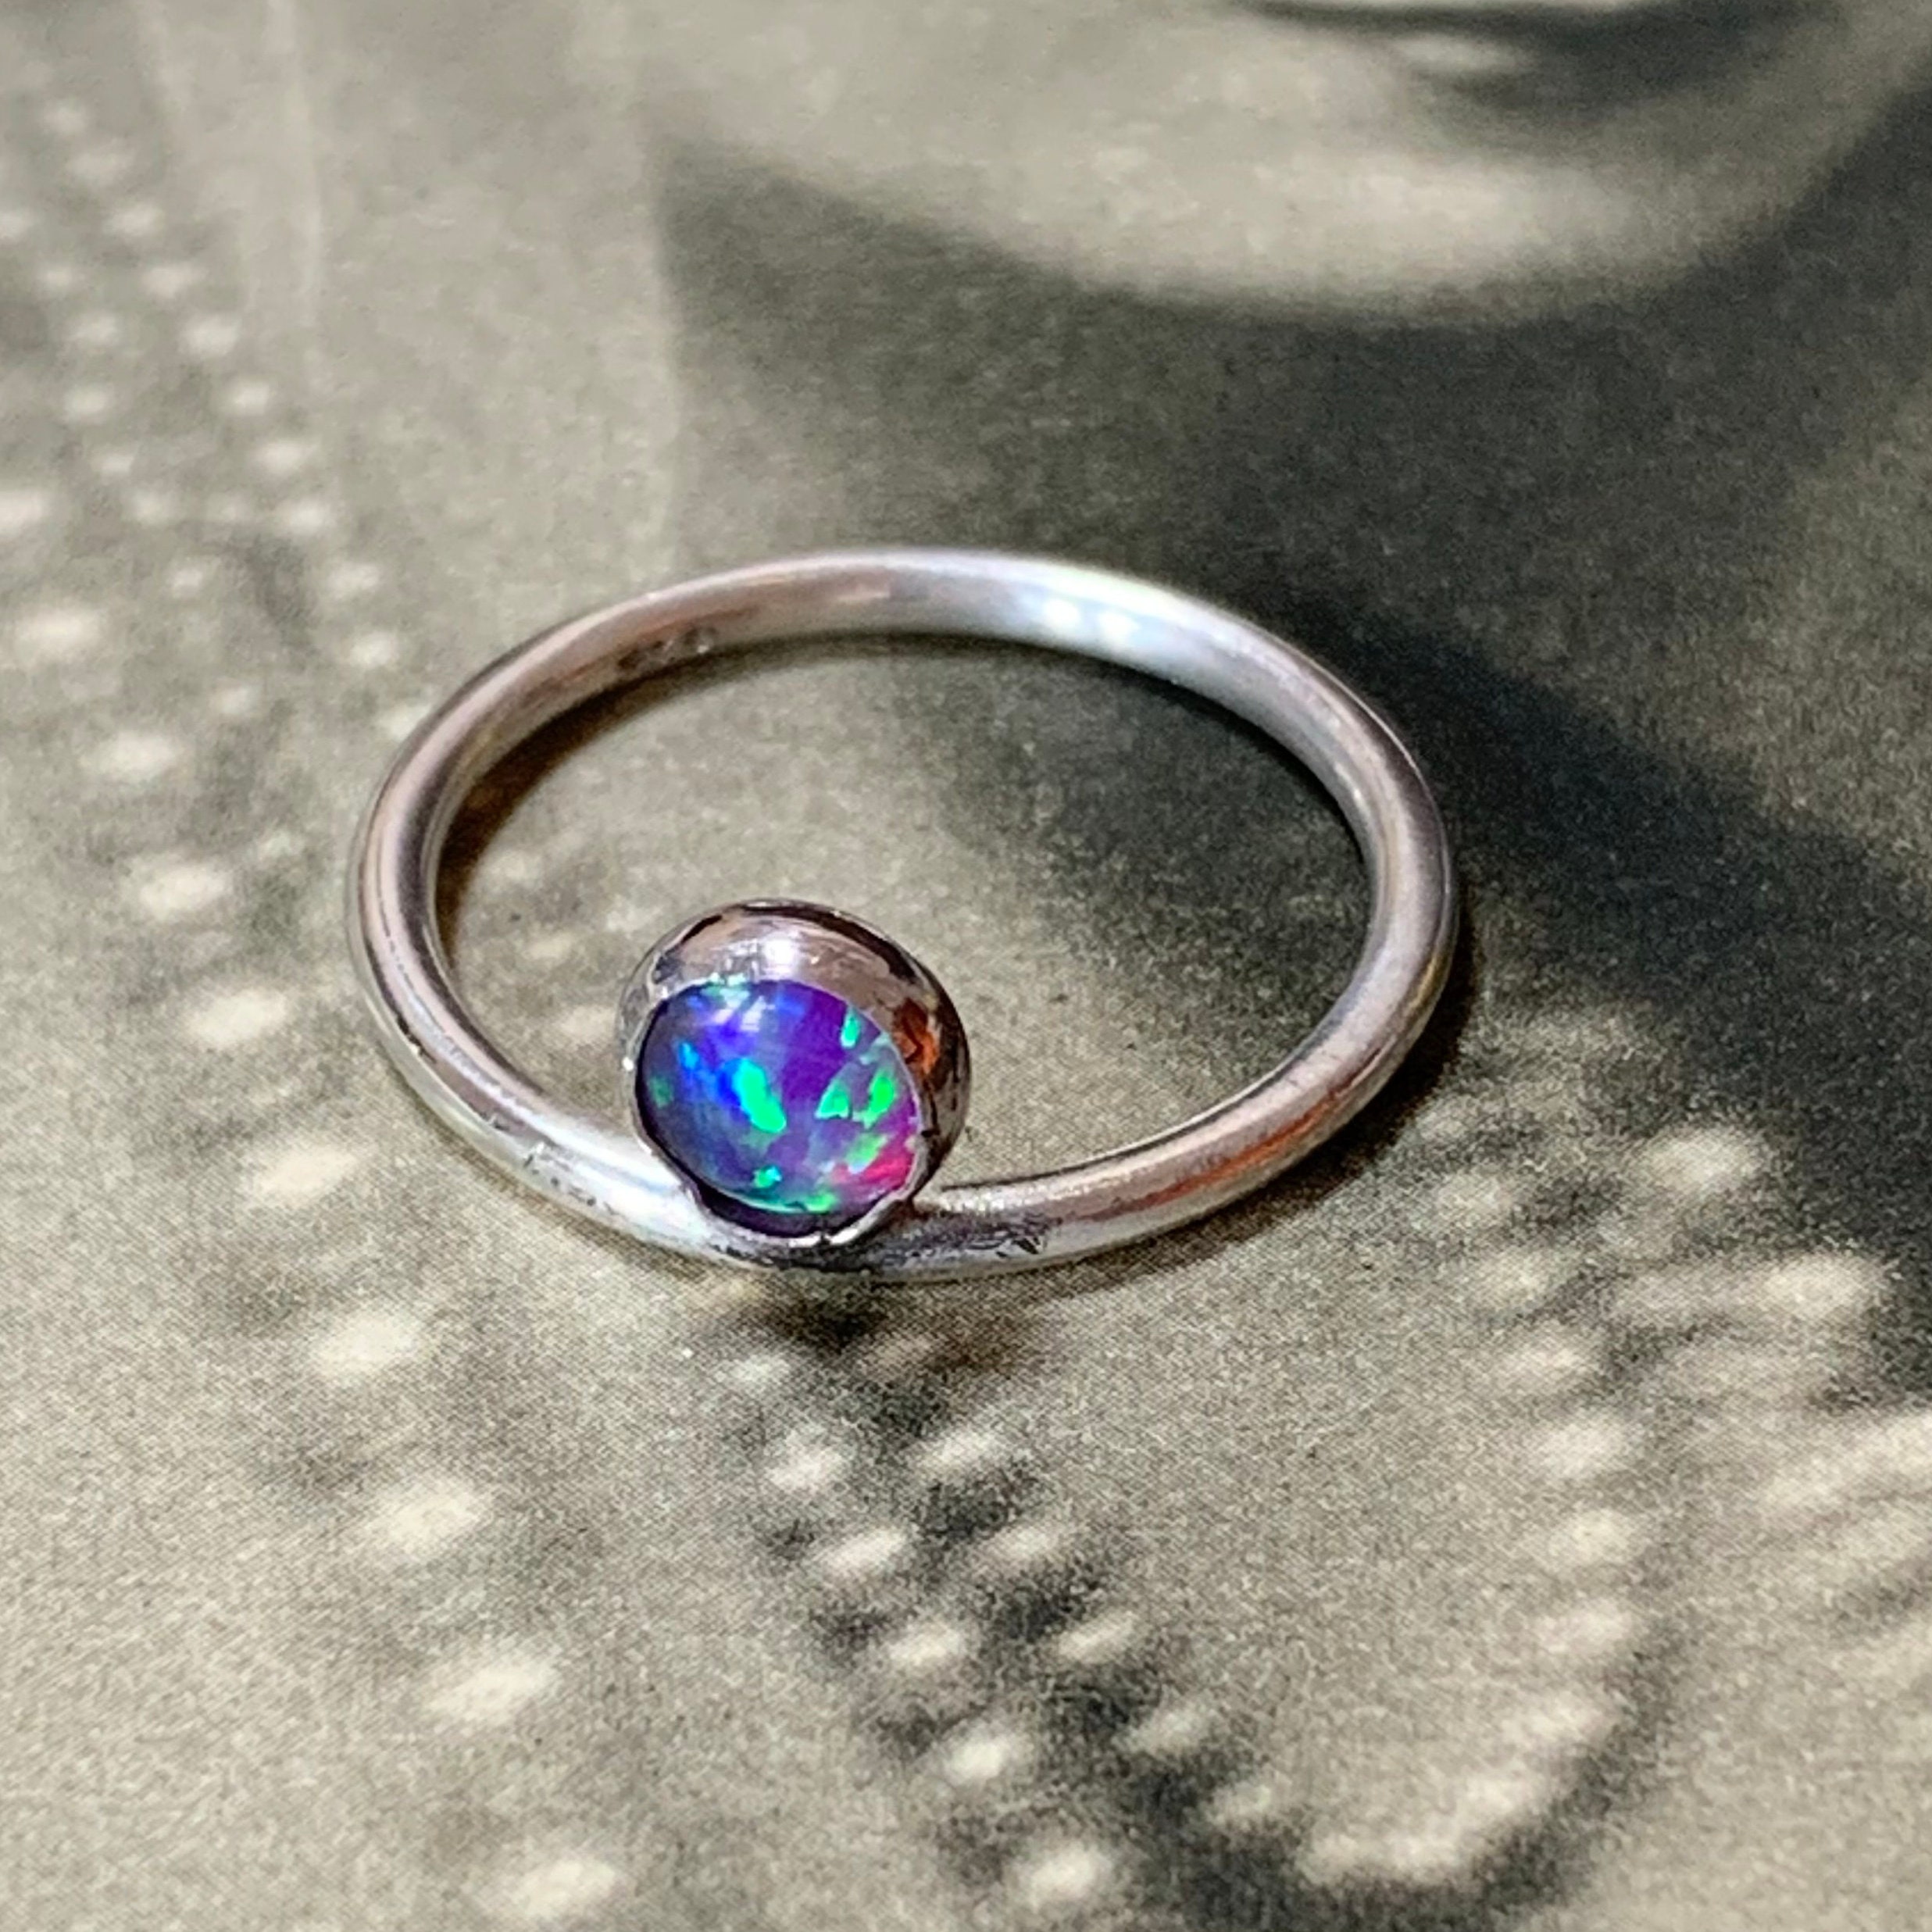 Handmade Blue Opal Ring in Silver. This Is A Handmade Made From Recycled Silver 925 Set With Small Ocean Blue Cabochon Size O